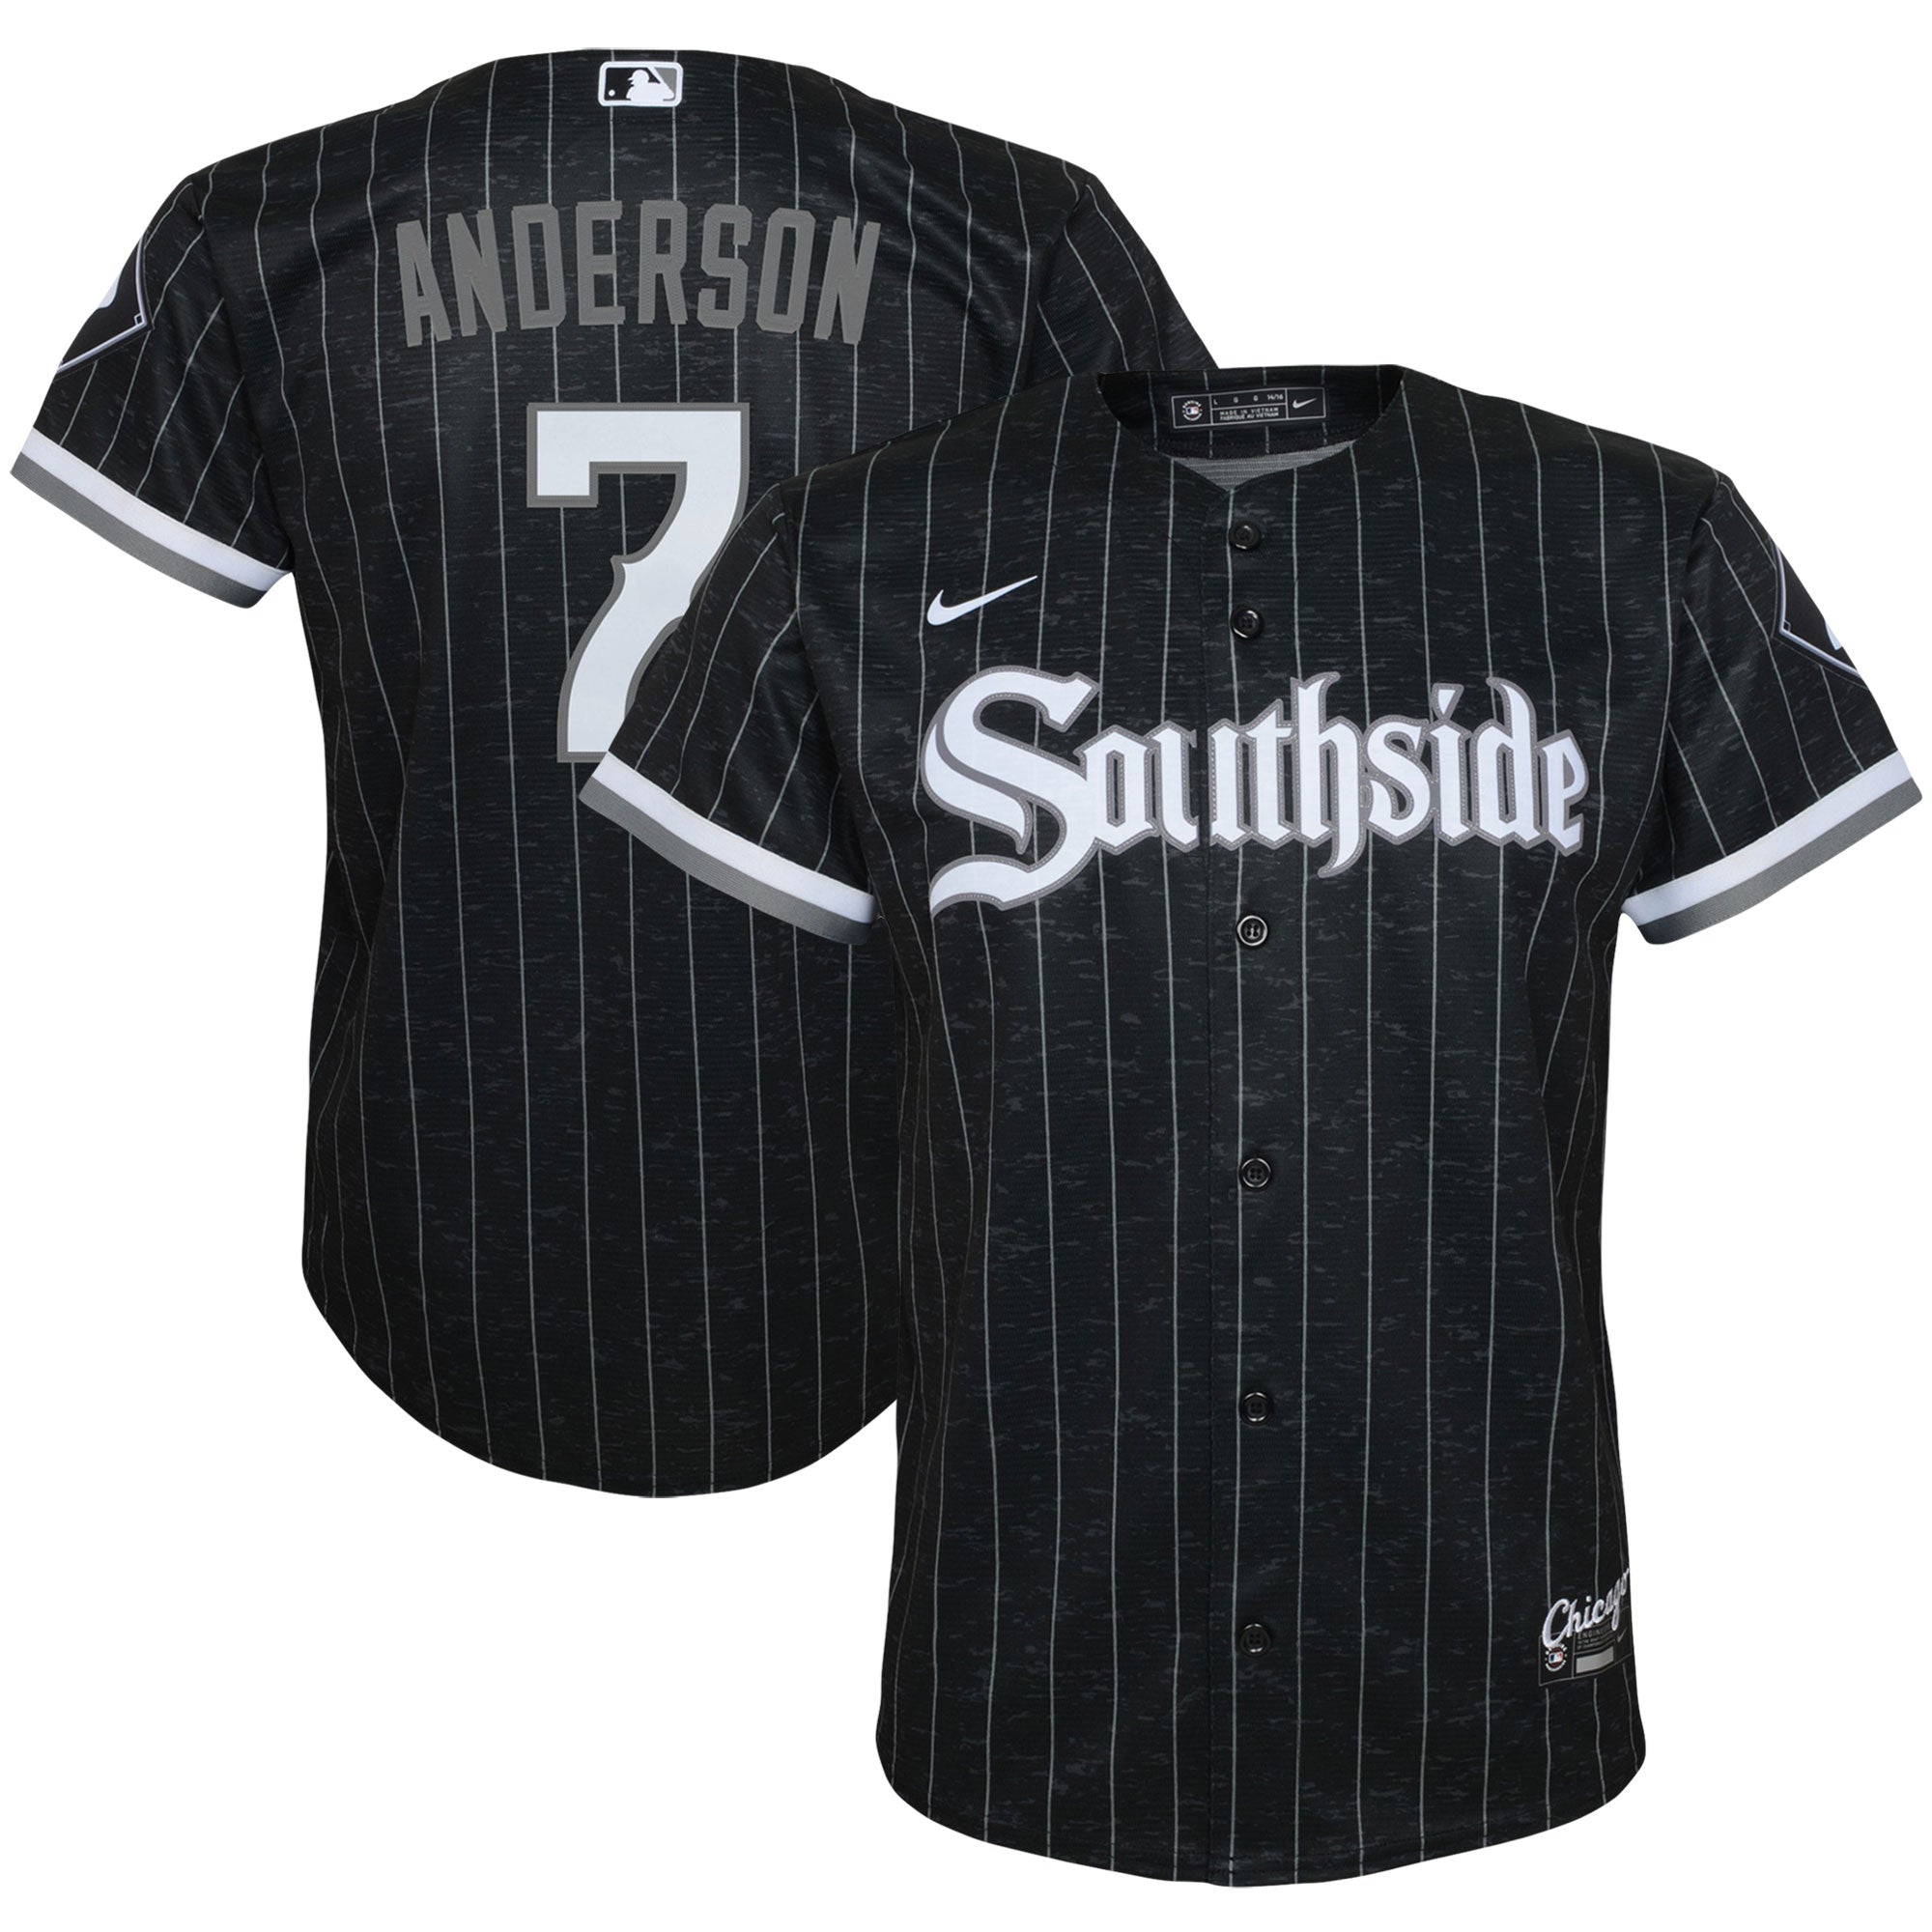 Clark Street Sports - Custom White Sox jersey made by us!! Thanks